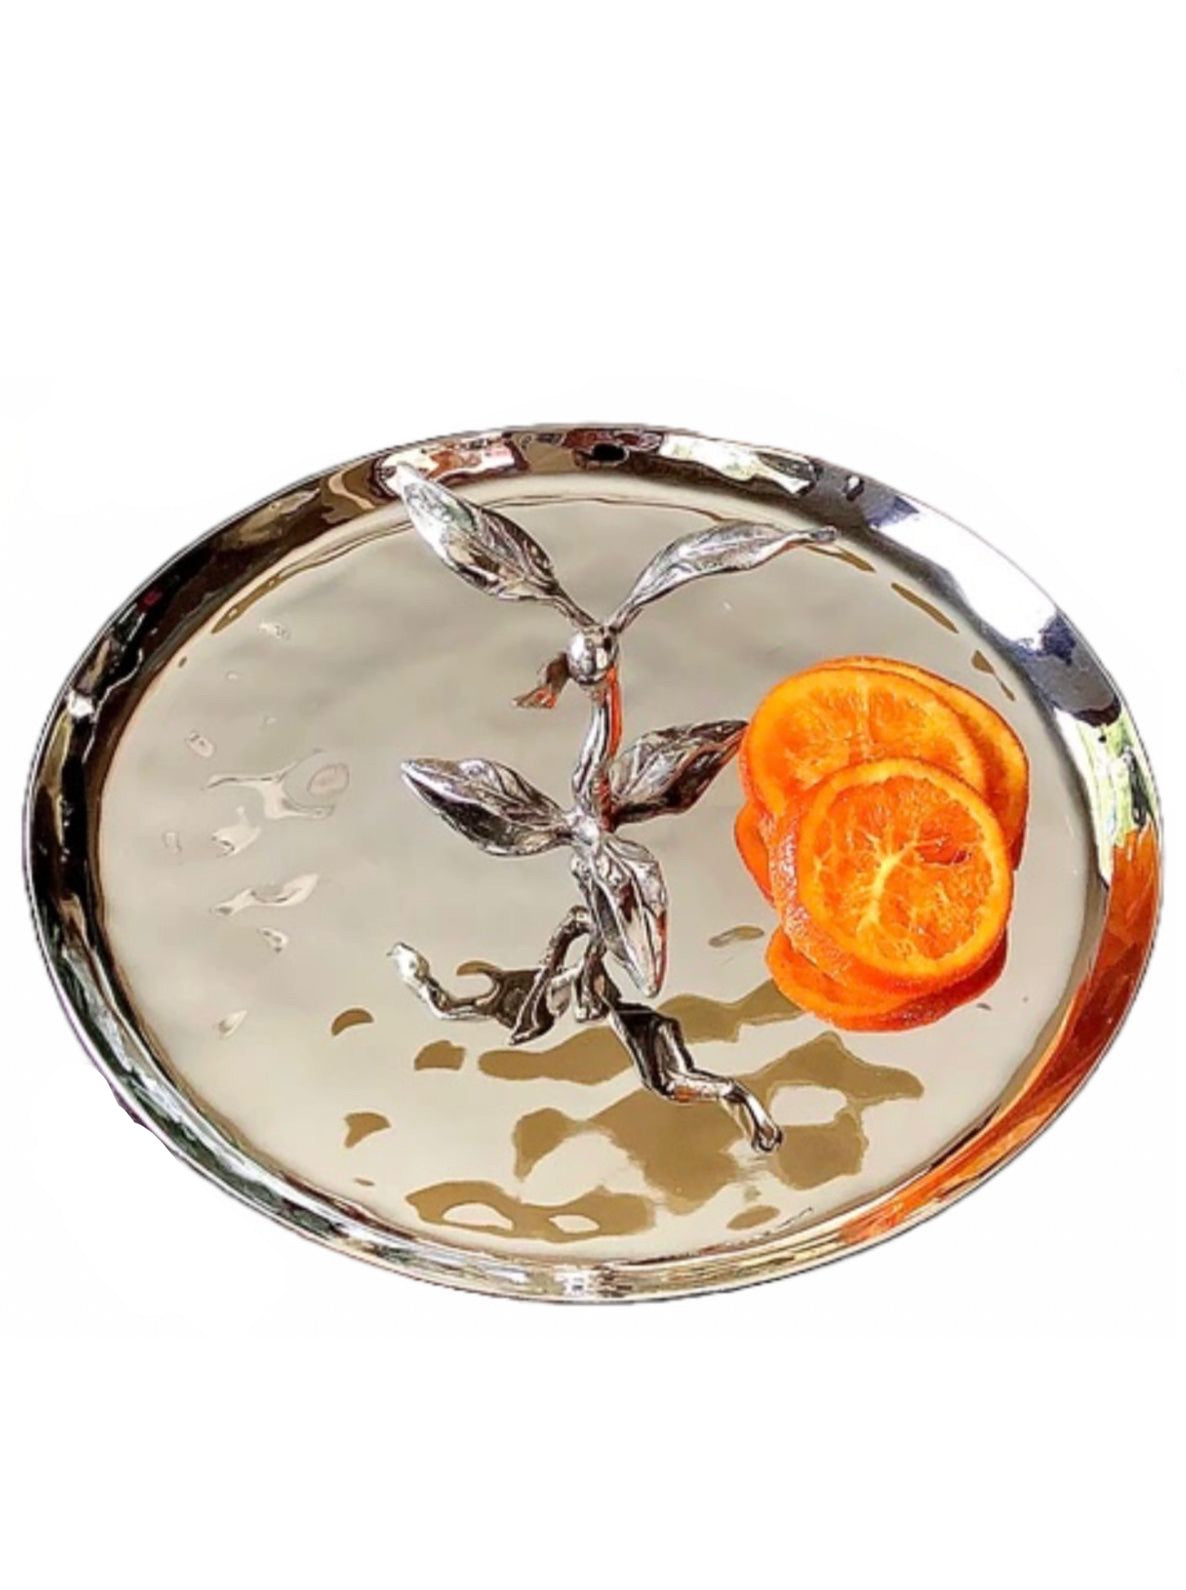 10.5D Stainless Steel Tidbit Tray with Olive Leaf Design sold by KYA Home Decor.